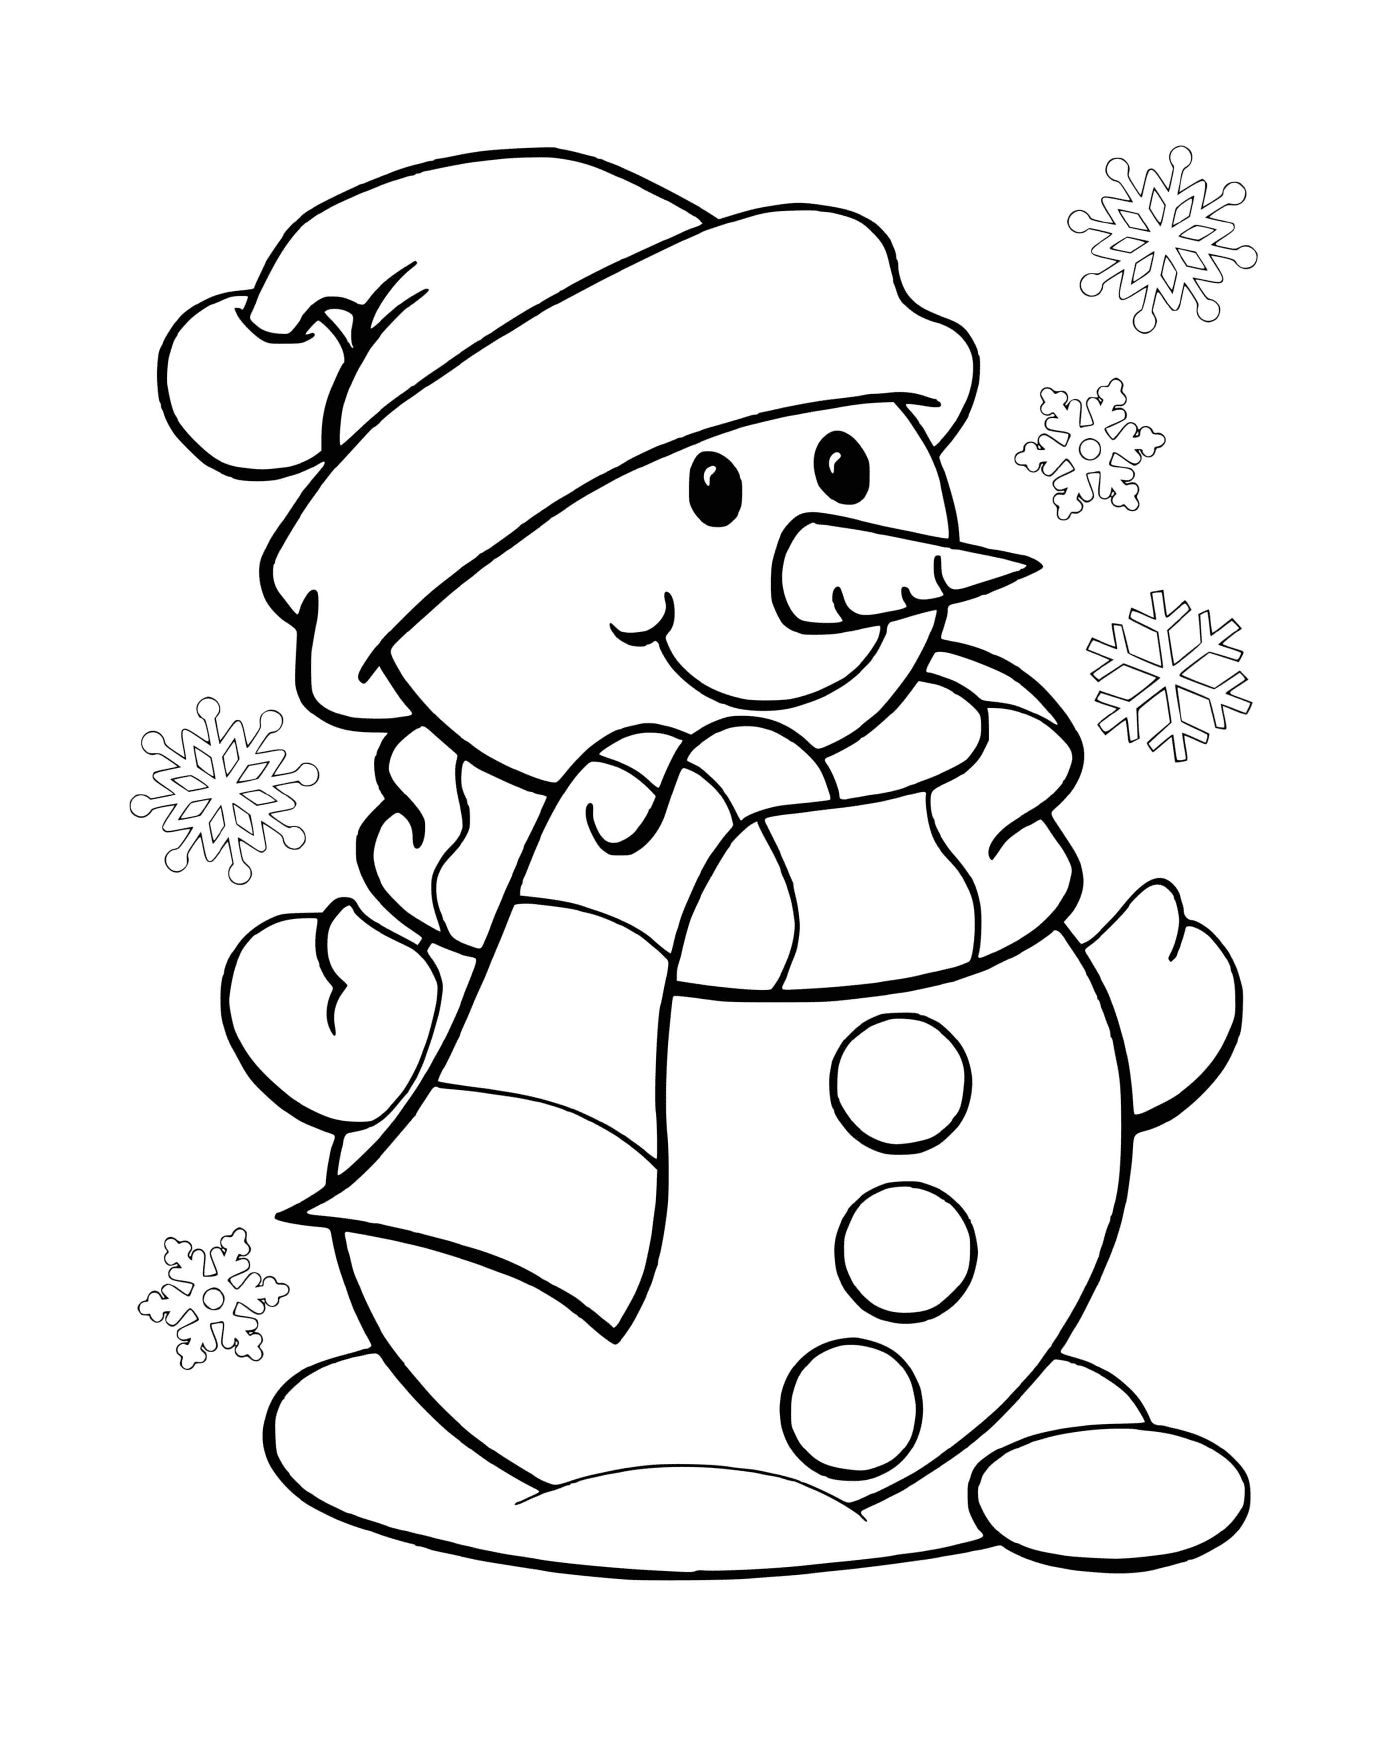  Snowman with snowflakes 